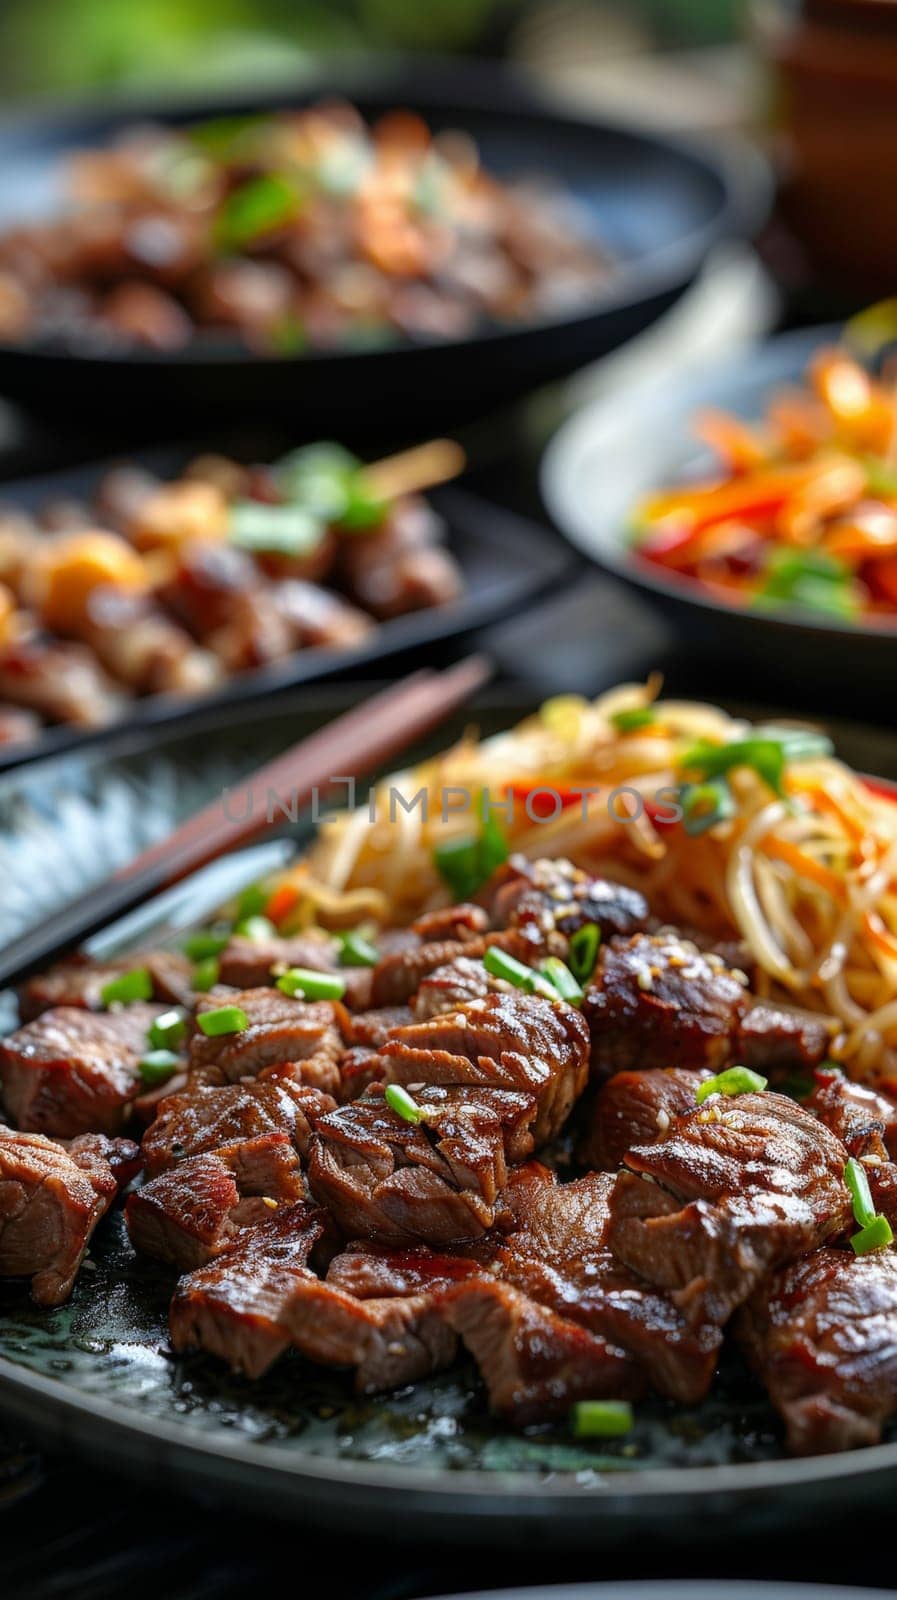 A plate of meat and noodles on a table with chopsticks, AI by starush